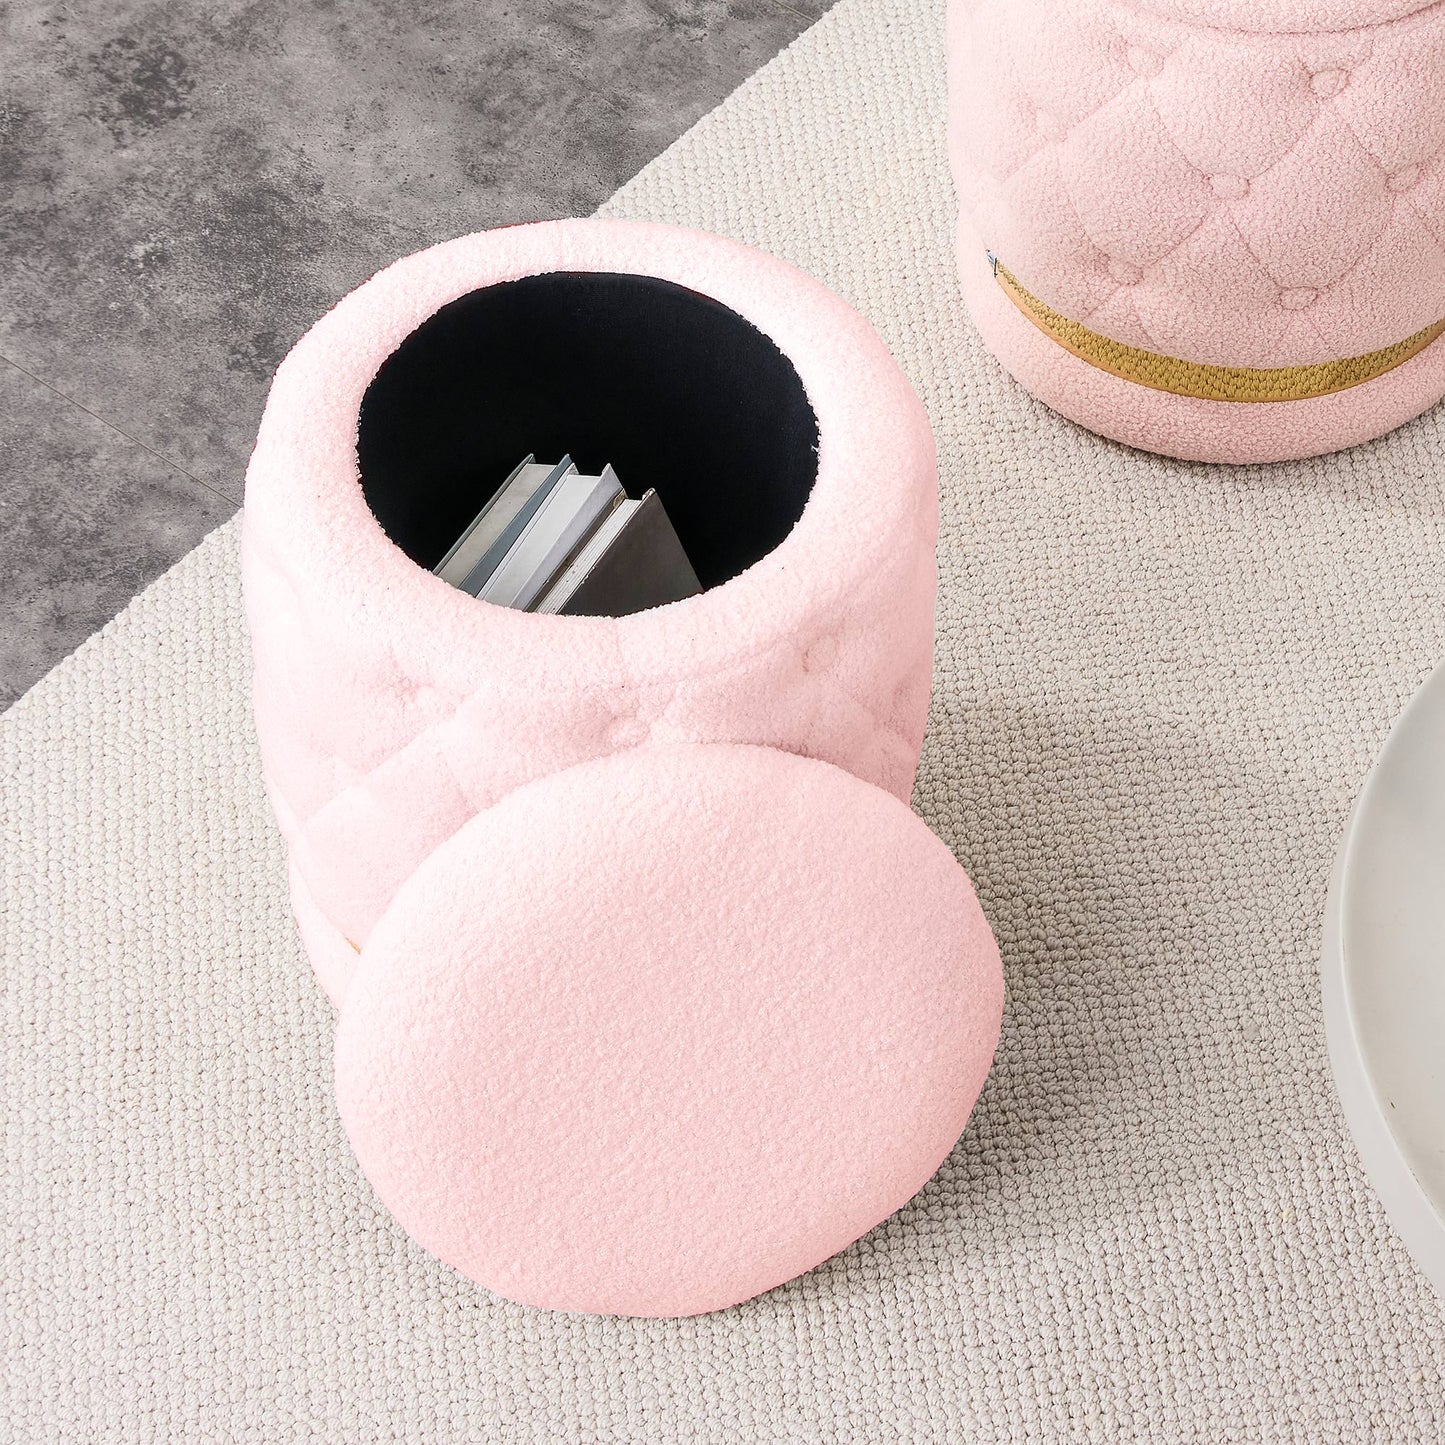 Chair Pink Round-shape Teddy velvet Makeup Stool Footstool, chair with storage space .Applicable to living room dresser kitchen bedroom dining room